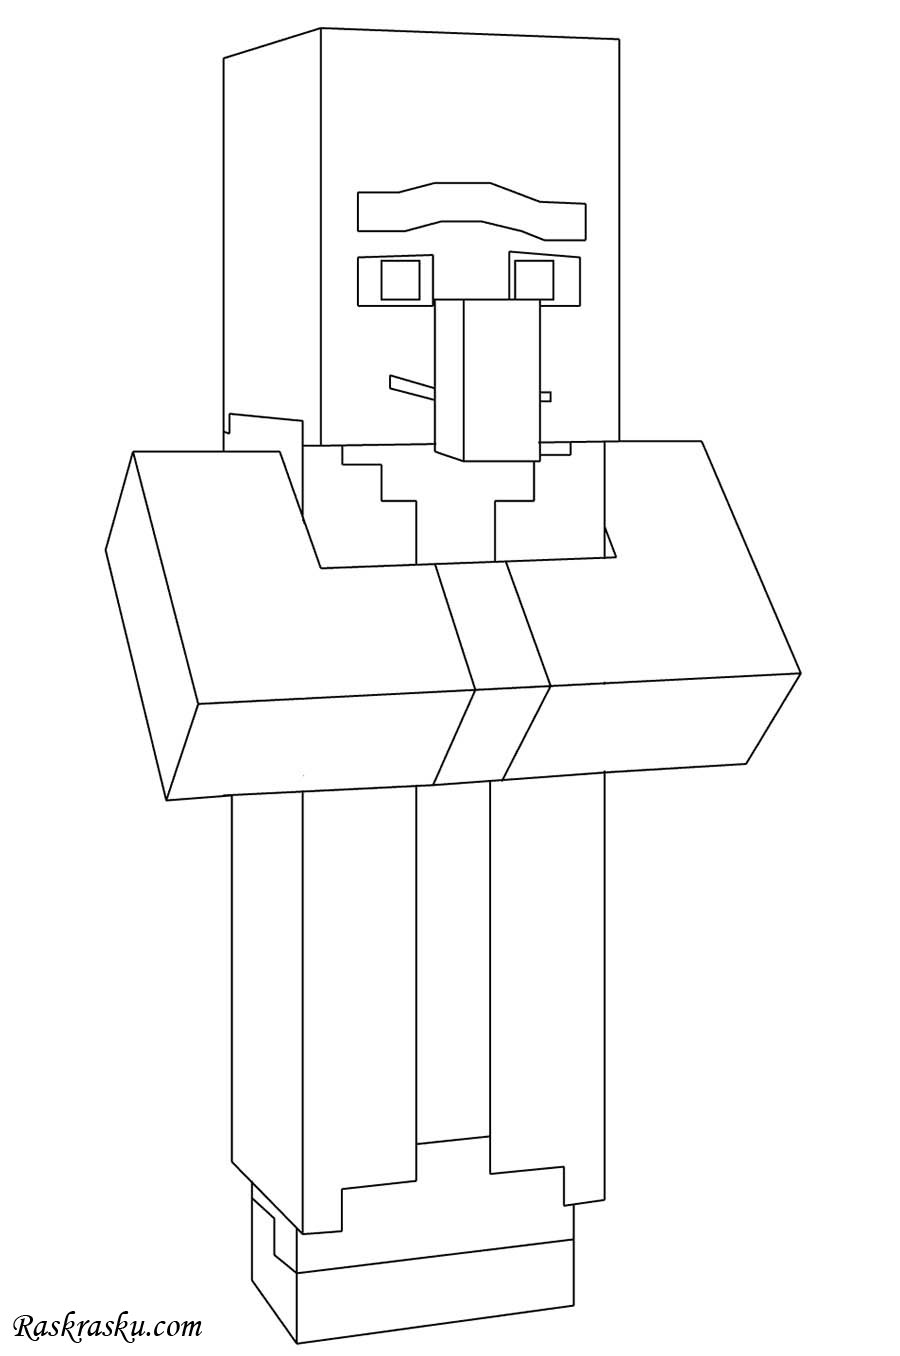 Tnt Minecraft Coloring Pages. Tnt. Best Free Coloring Pages